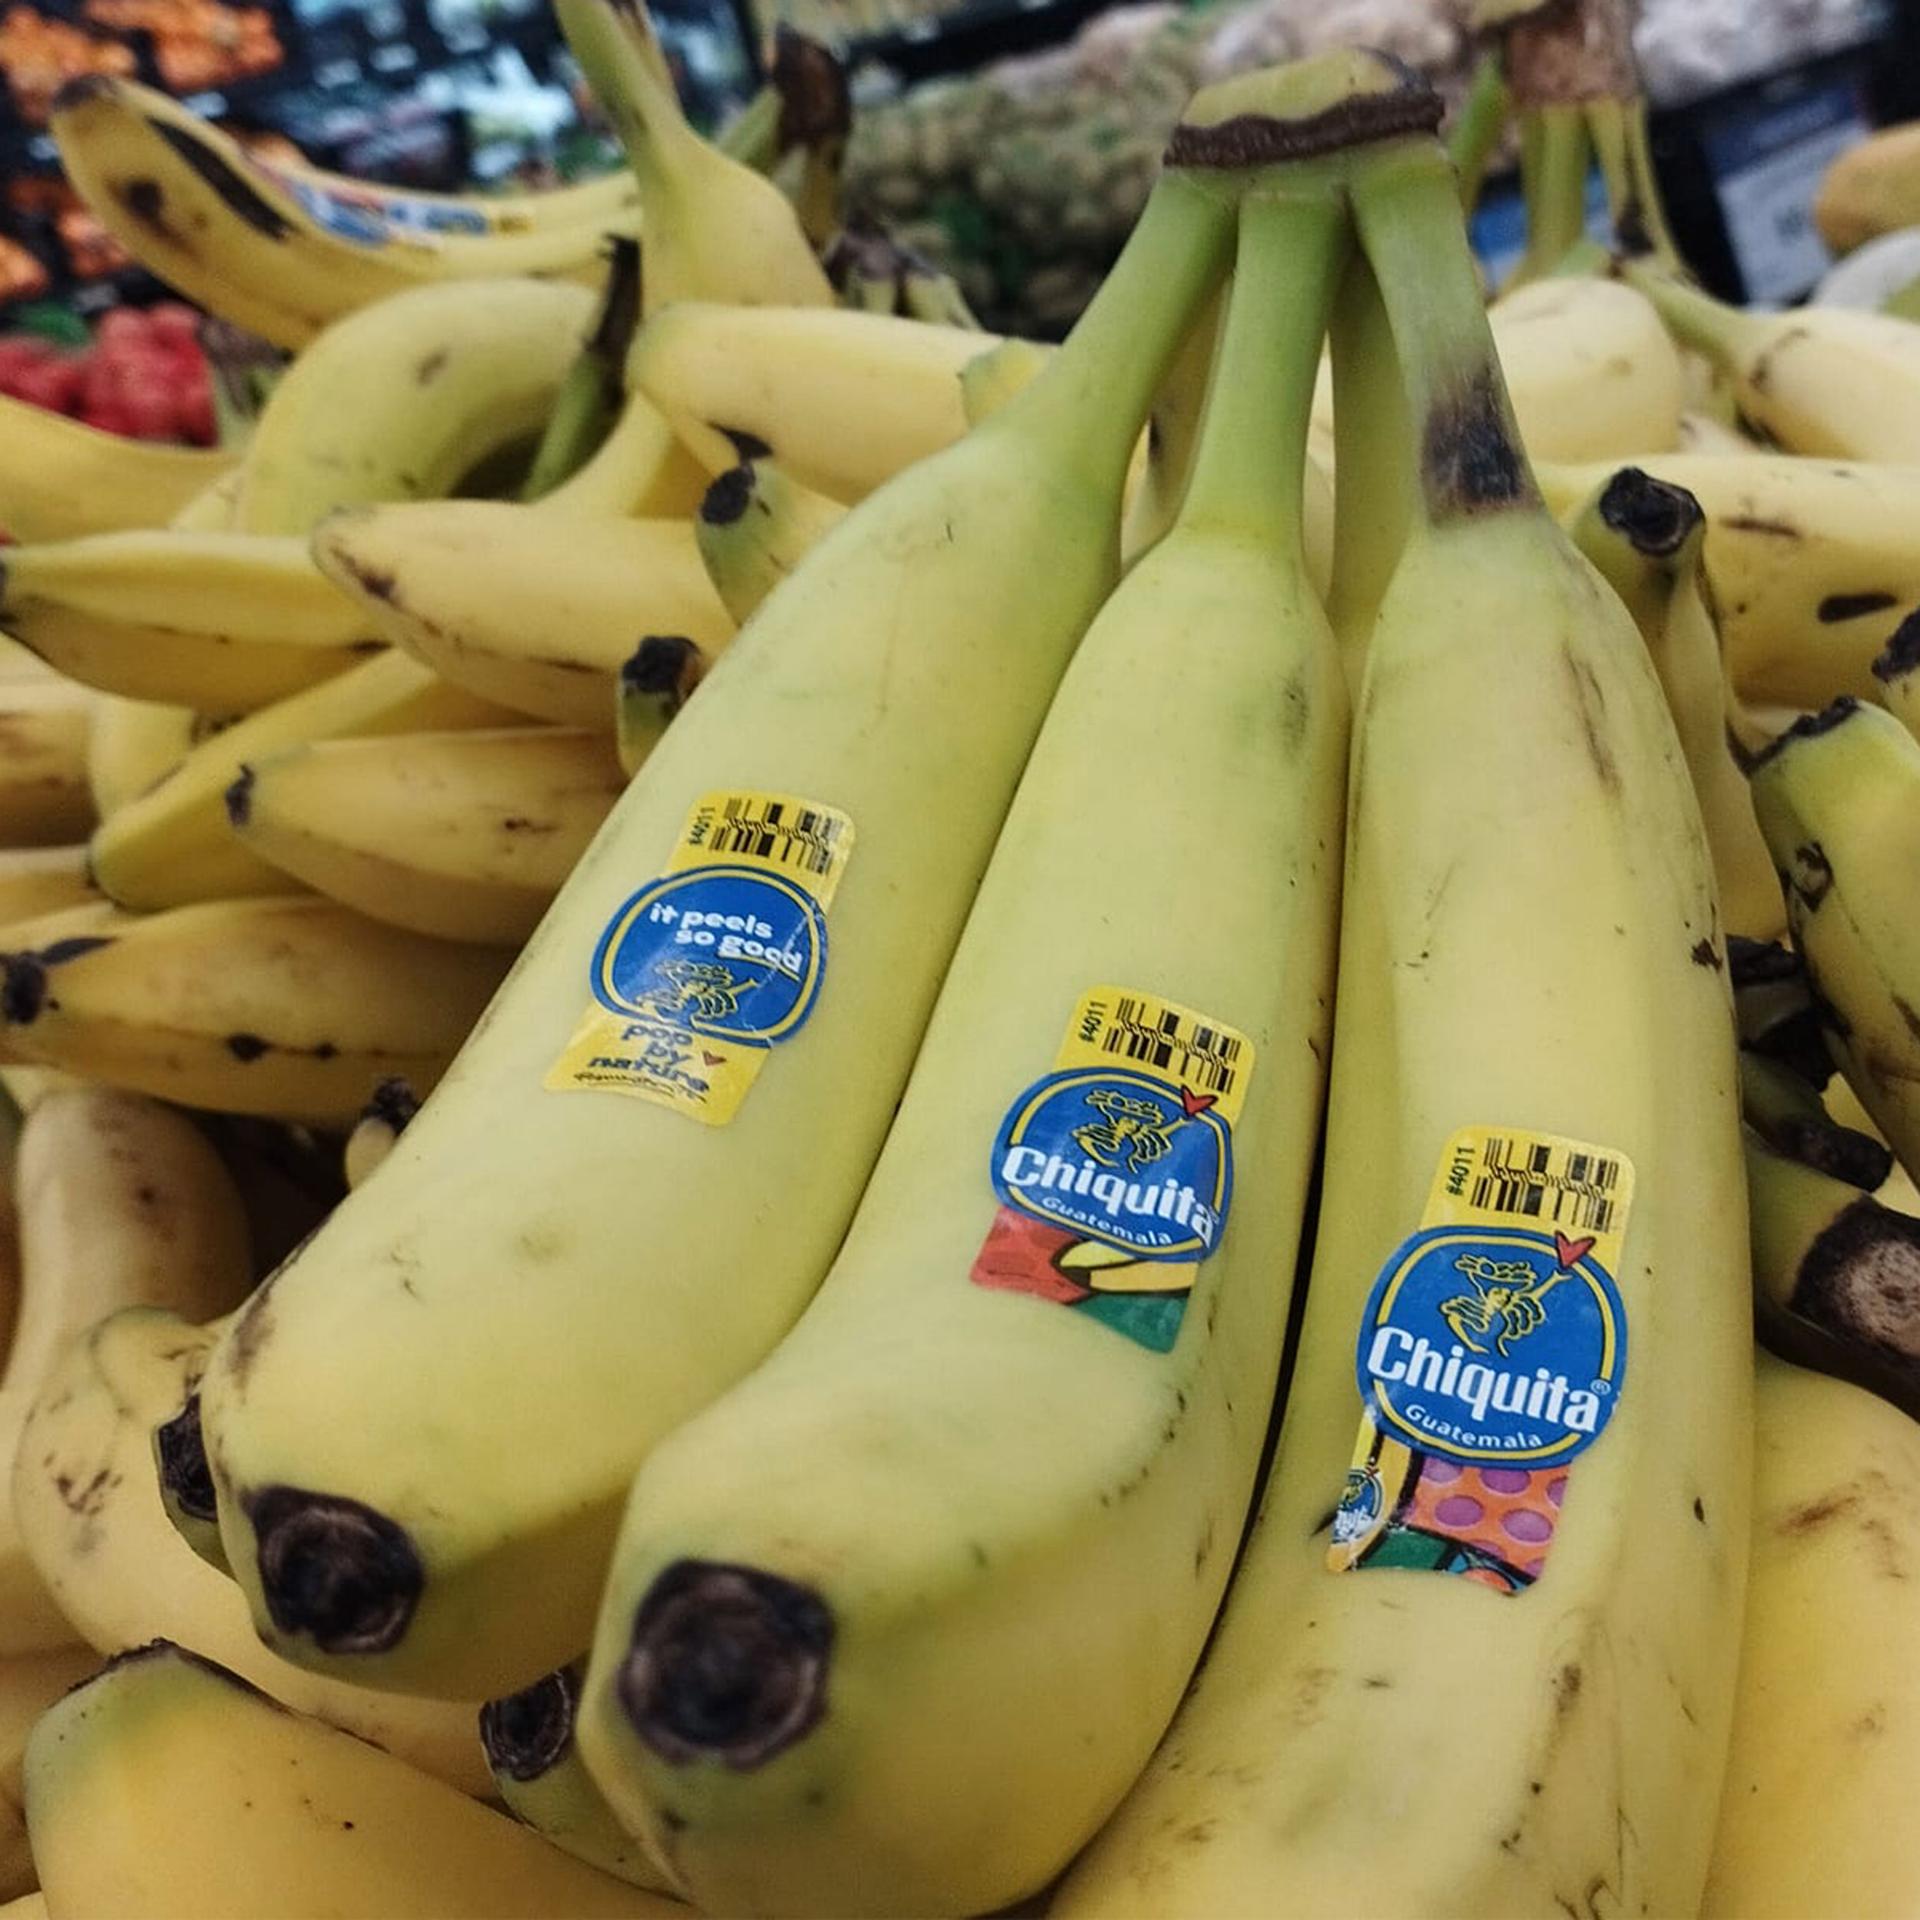 Chiquita bananas grown in Guatemala sold for 34 cents a pound at a supermarket in El Salvador.